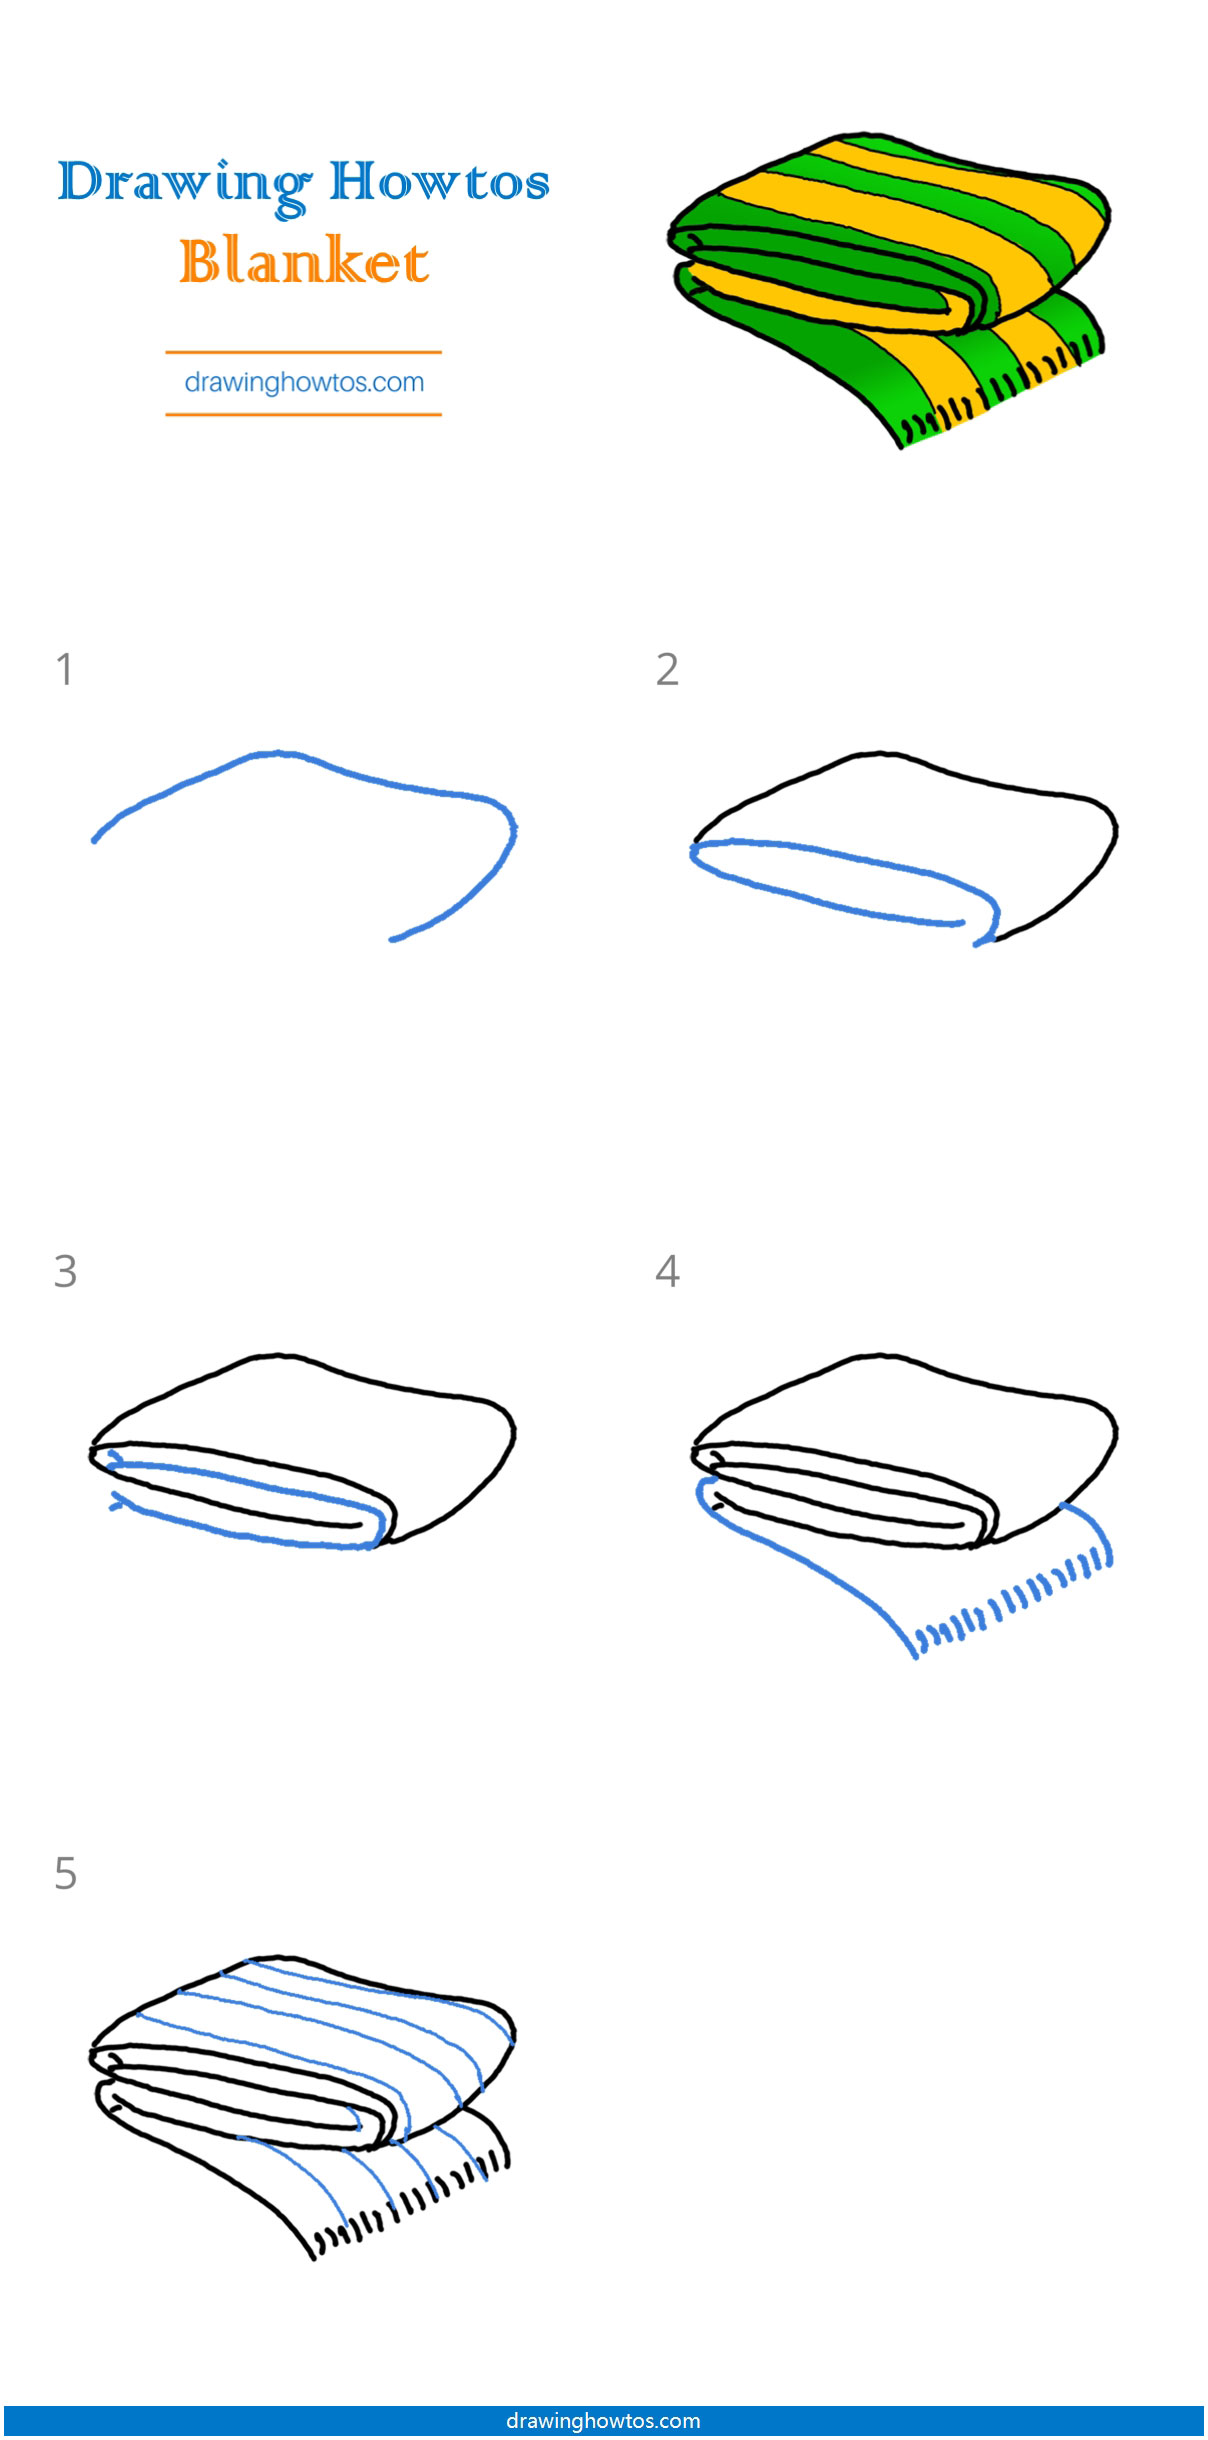 How to Draw a Folded Blanket Step by Step